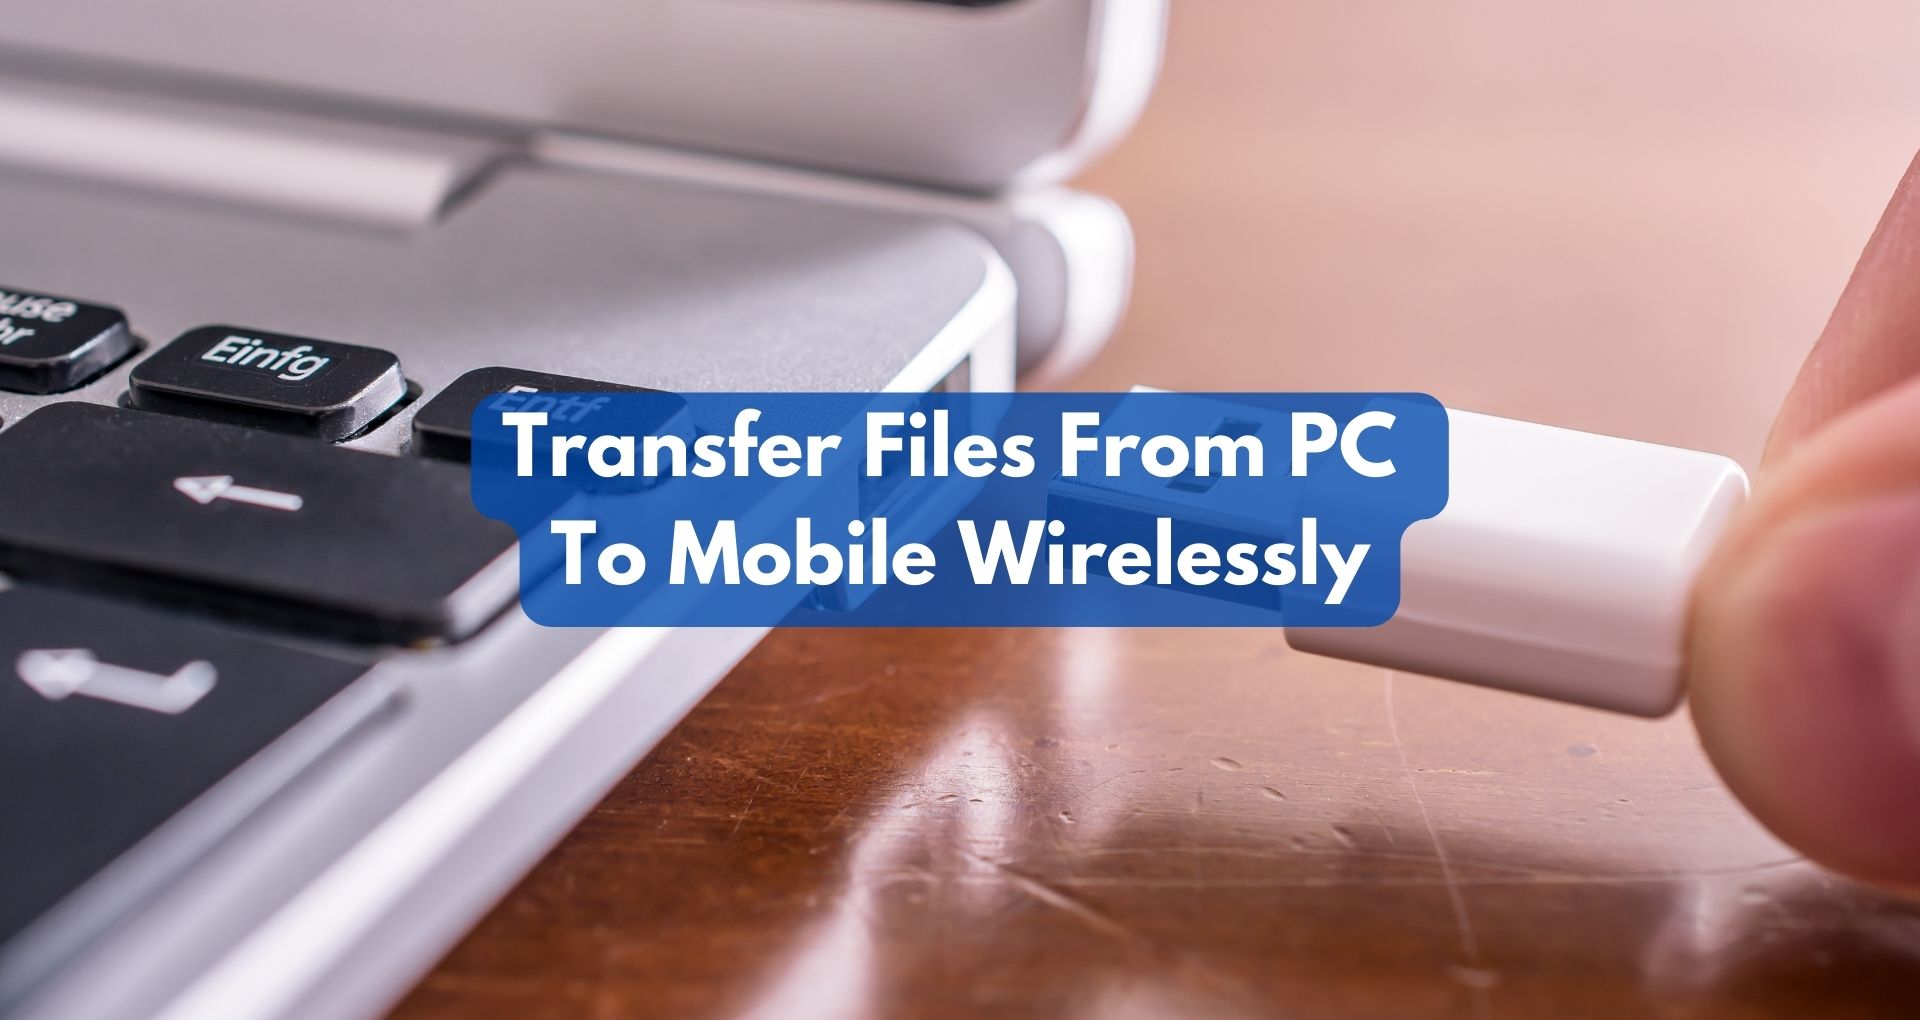 How To Transfer Files From PC To Mobile Wirelessly